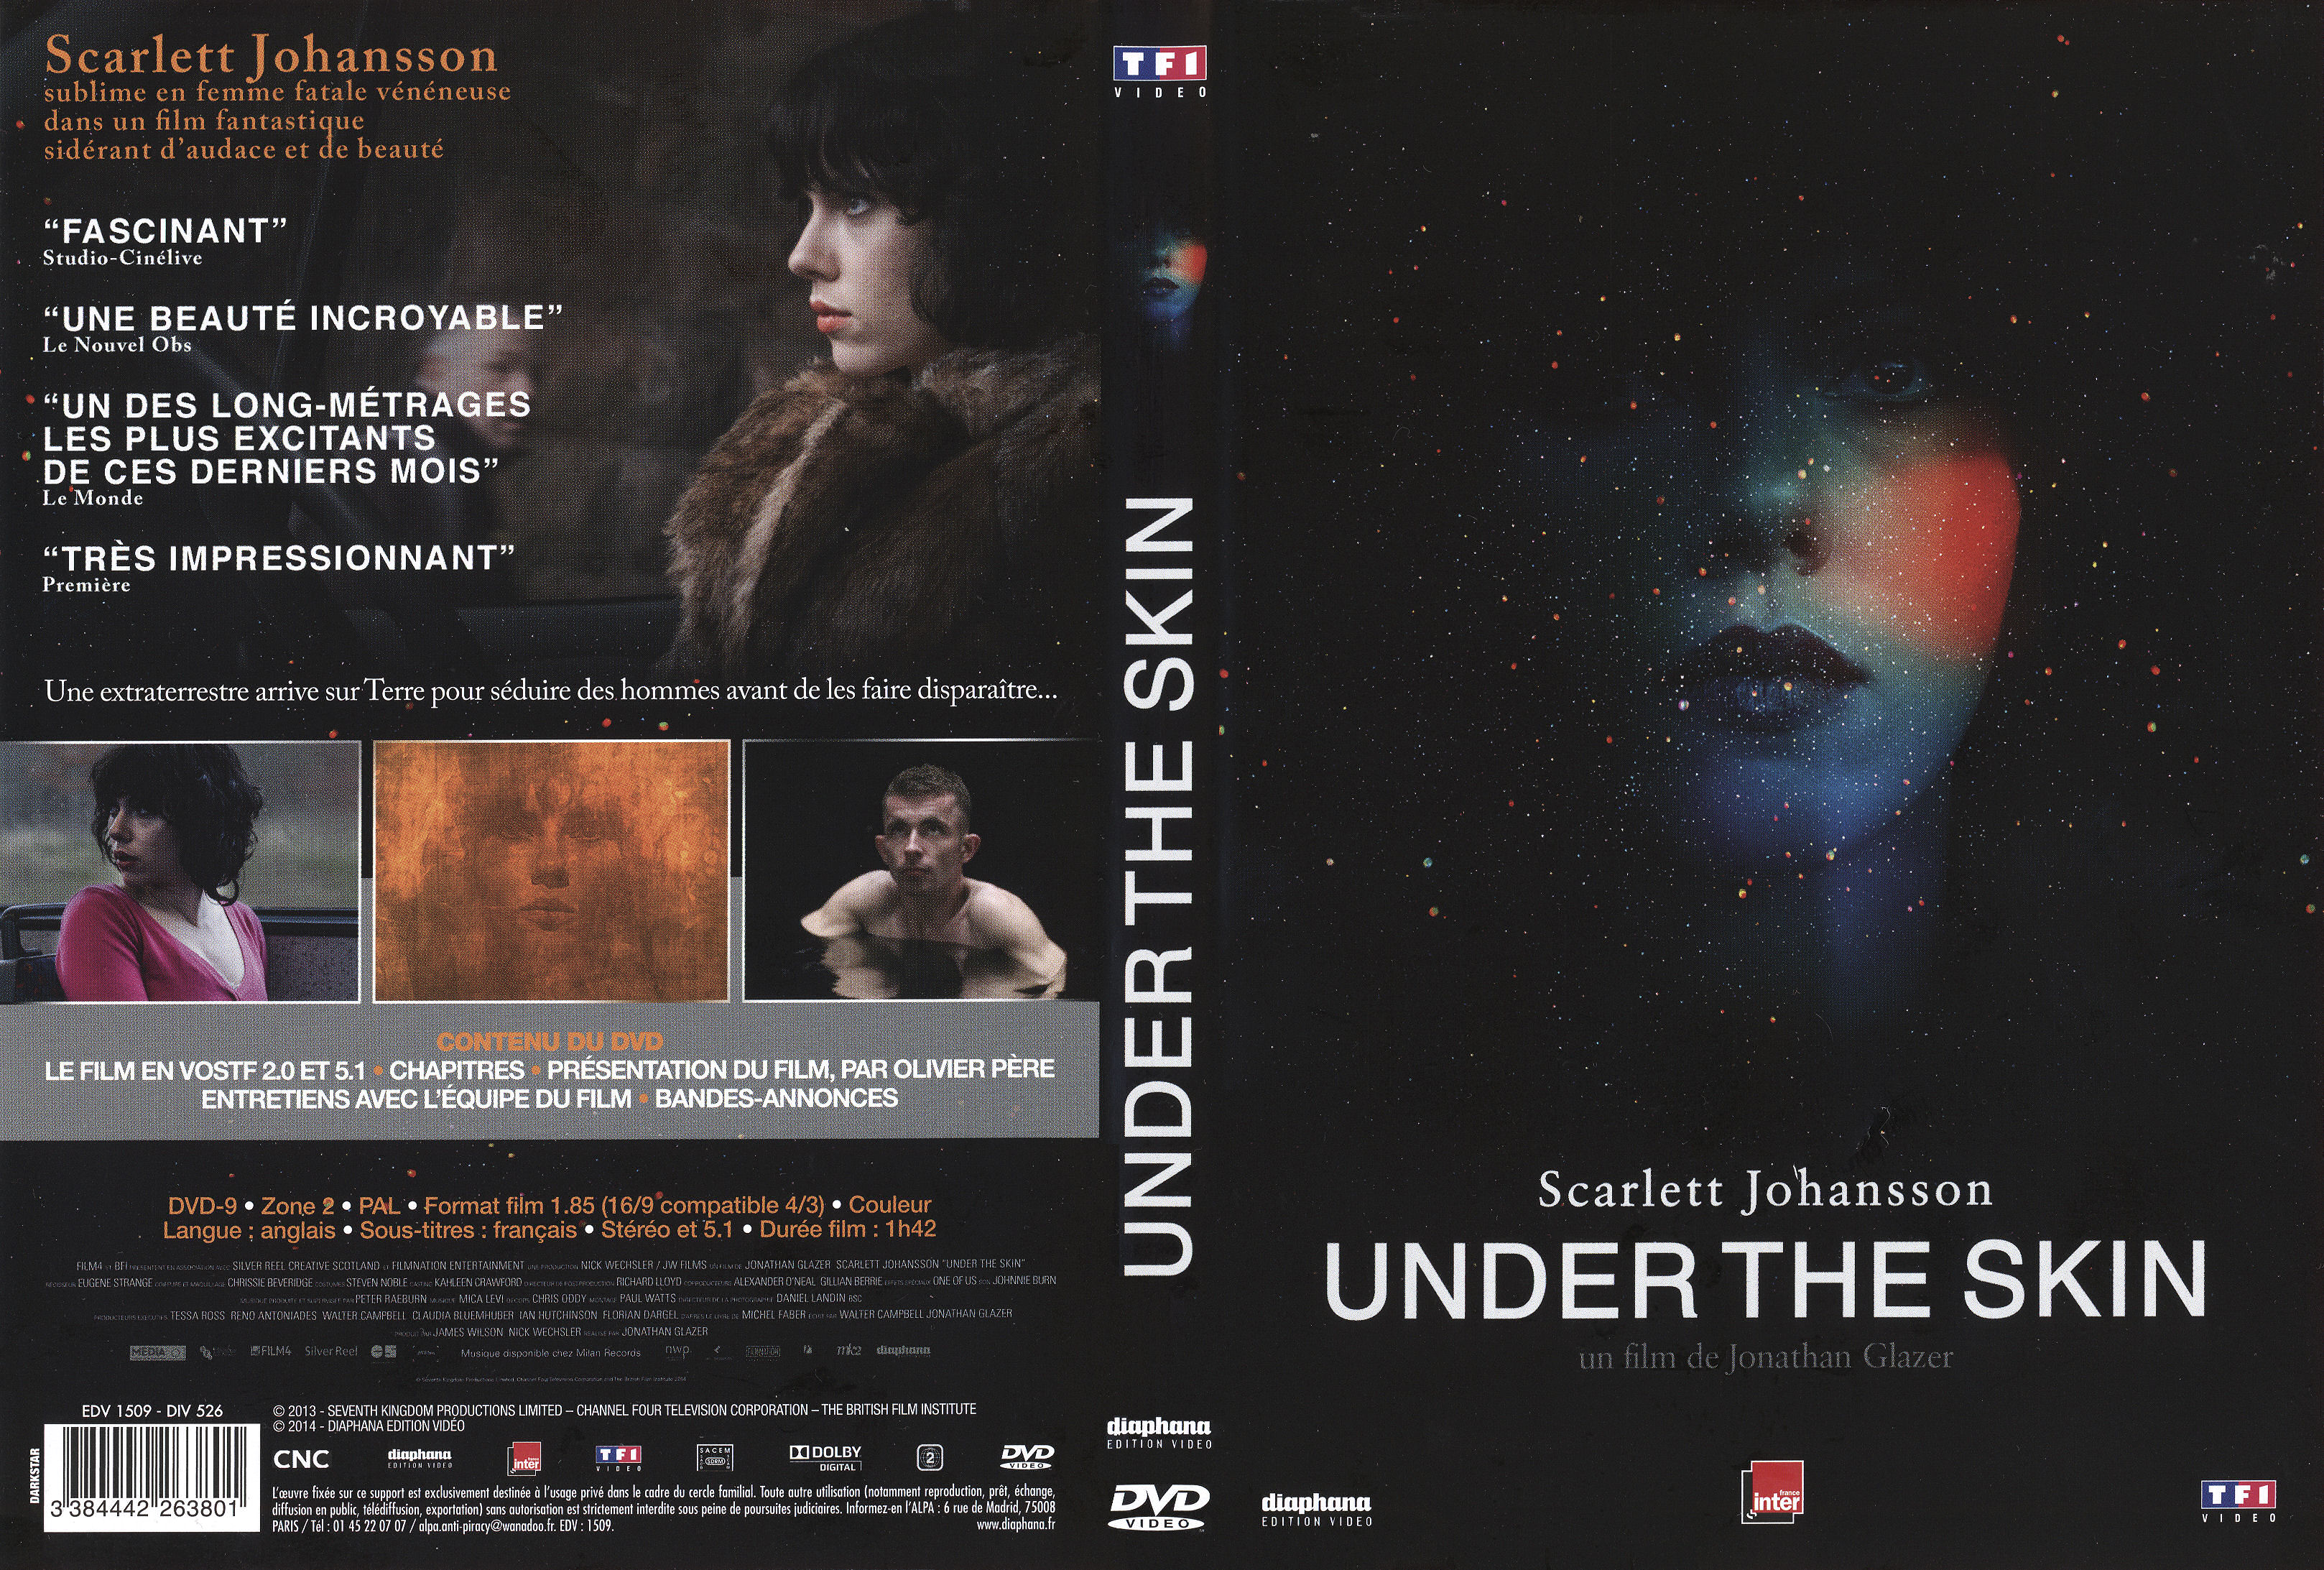 Jaquette DVD Under the skin